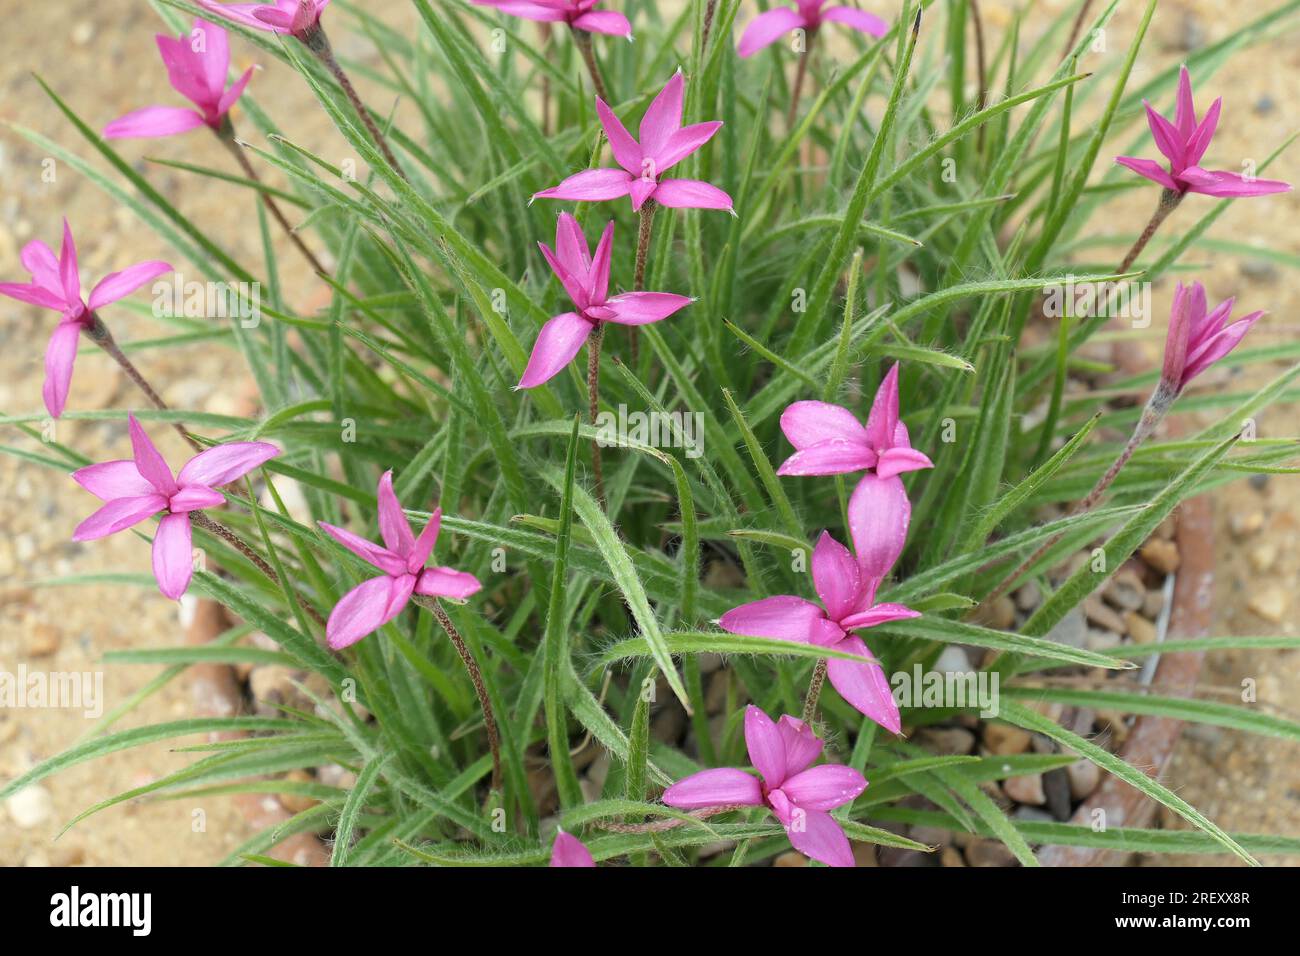 Closeup overhead view of the pink red flowering low growing hardy rockery plant rhodohypoxis baurii Emely Peel Red Star. Stock Photo